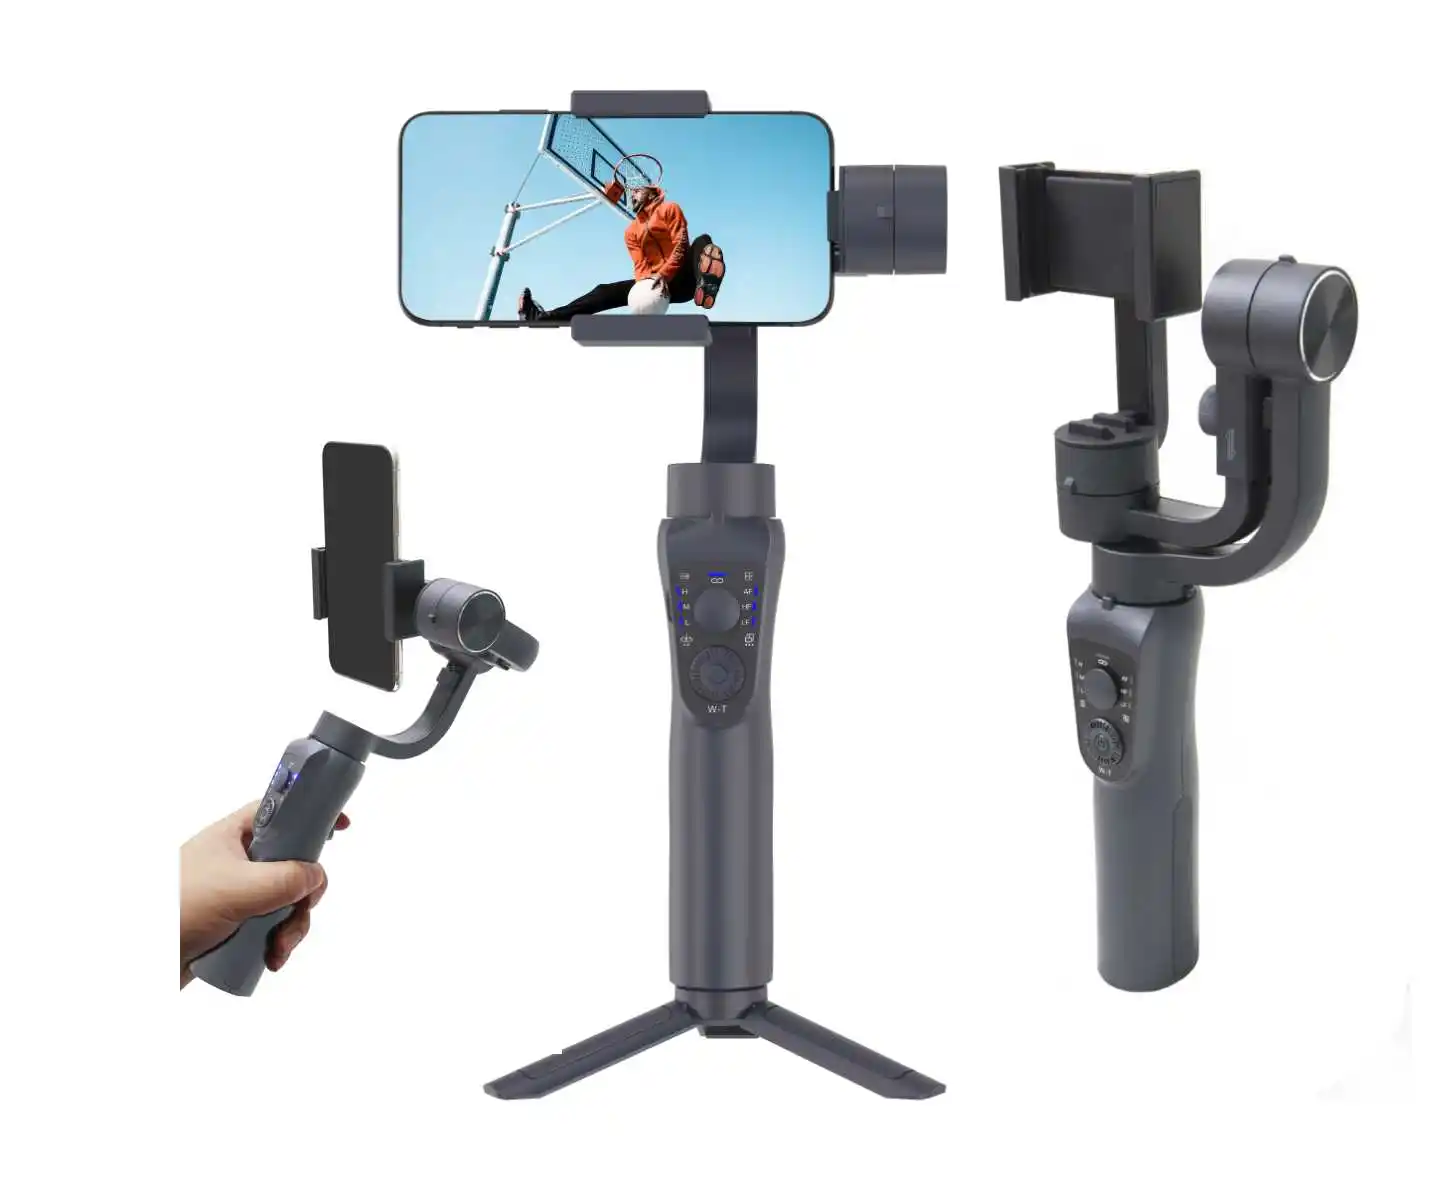 factory app customizable gimbal stabilizer for smartphone or action camera 3 Axis Portable Handheld Gimbal Stabilizer For phone